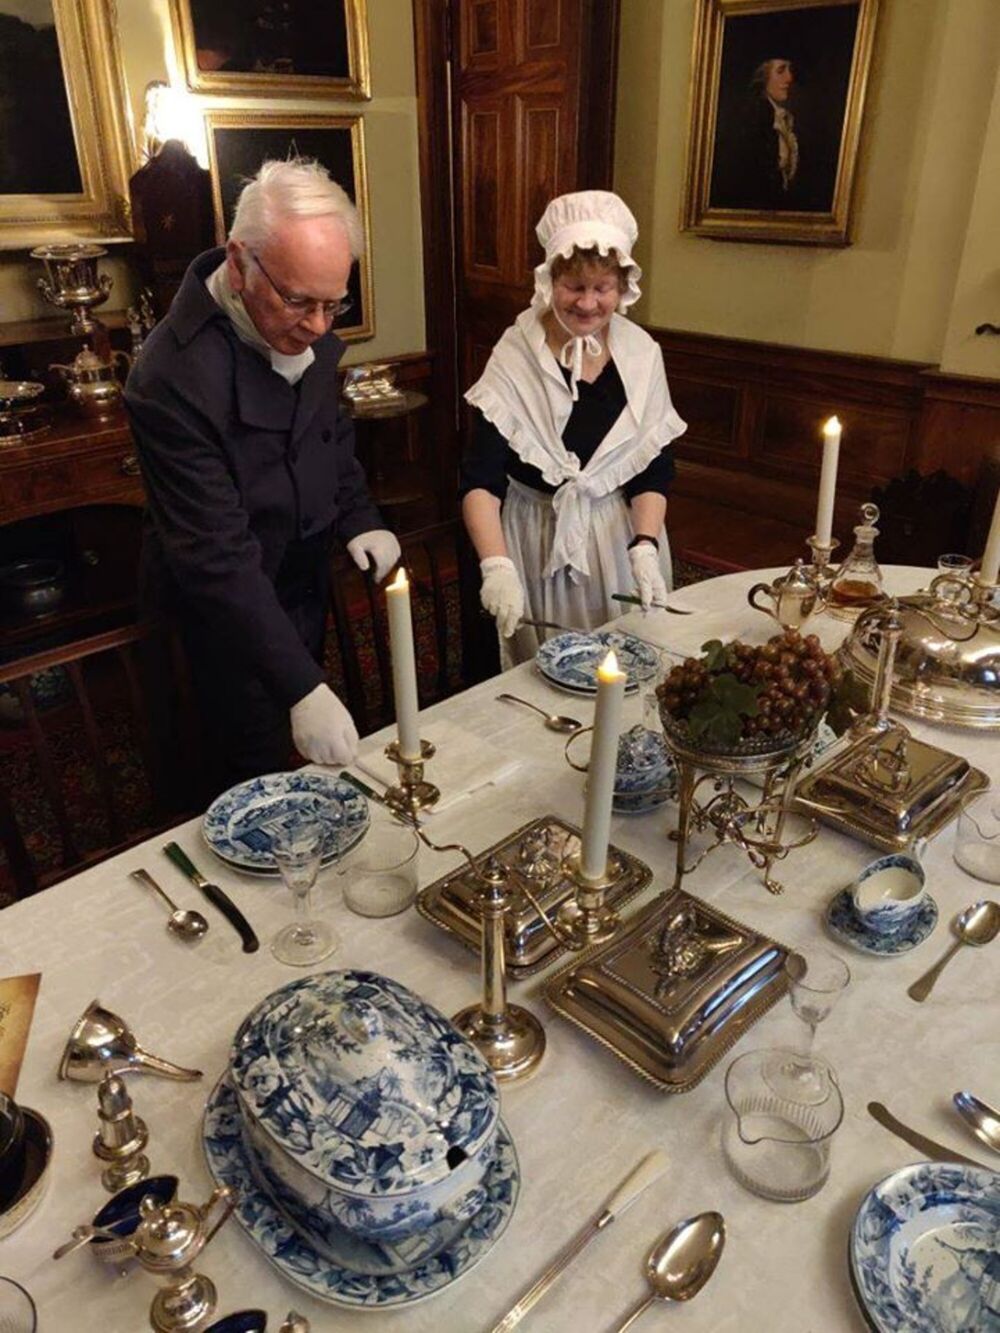 A butler and a housekeeper in Georgian costumes are laying a table for dinner in a grand Georgian dining room.